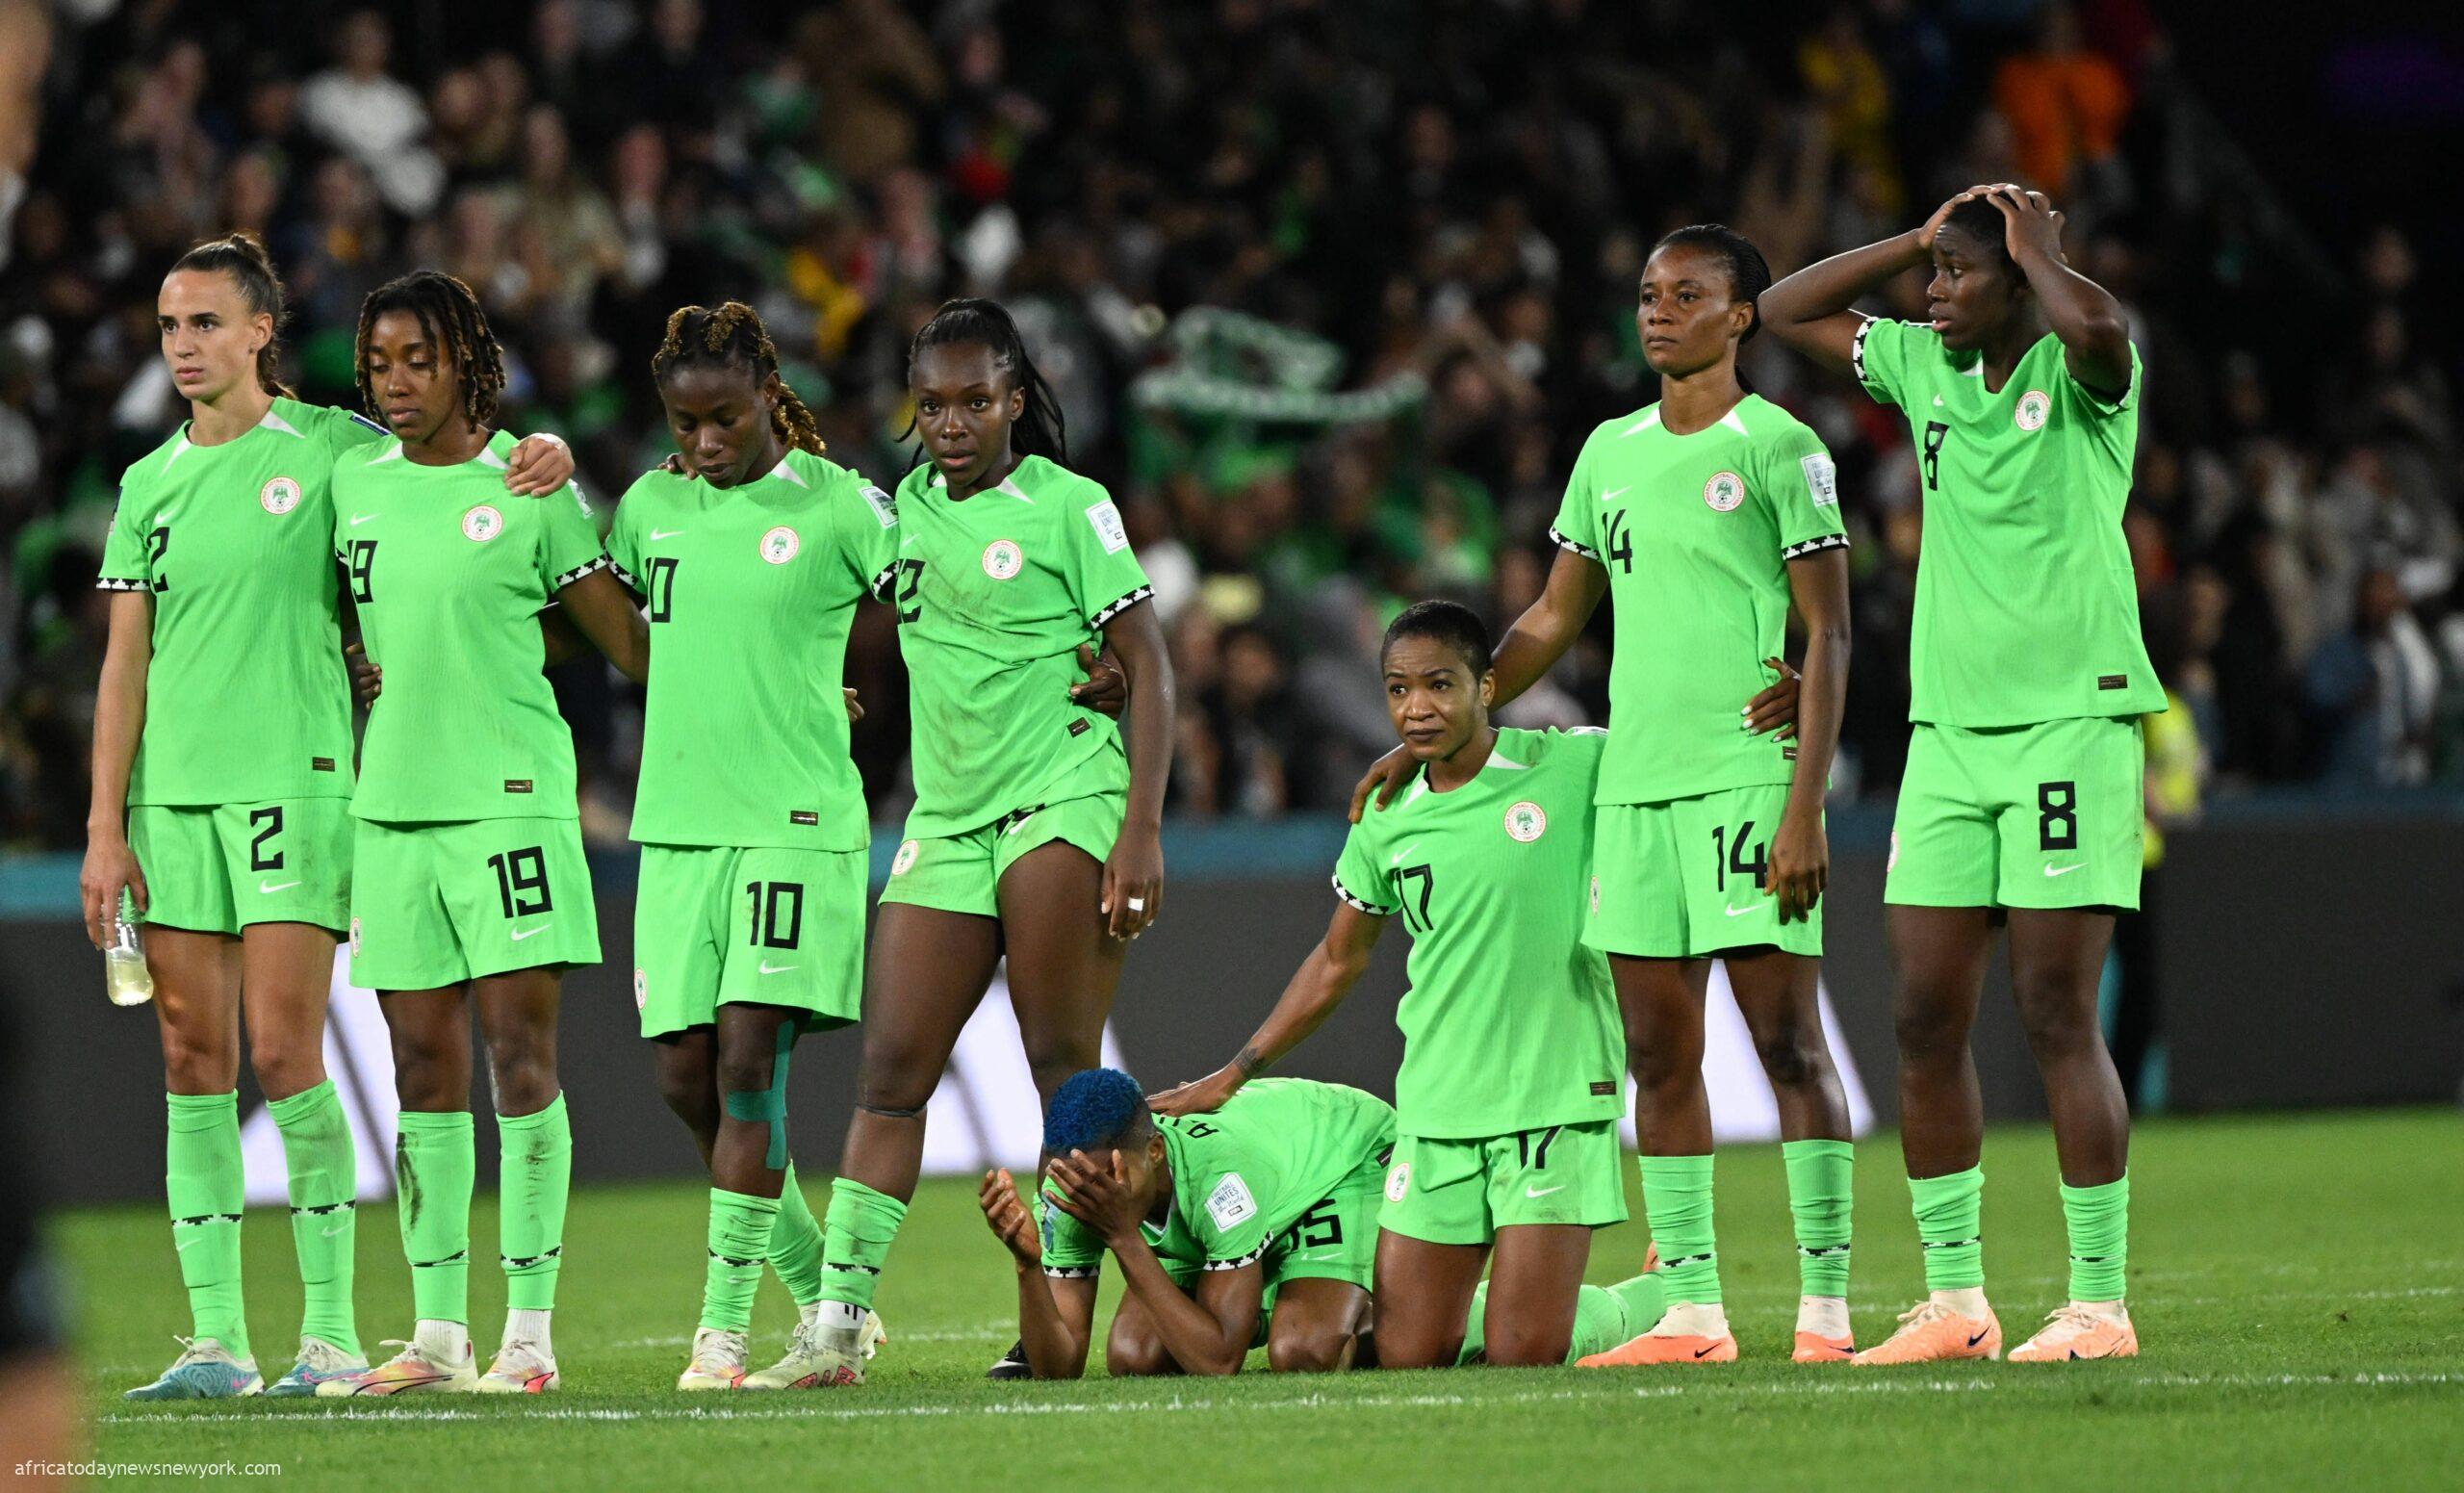 Reps Summon NFF Over Unpaid Allowances To Super Falcons